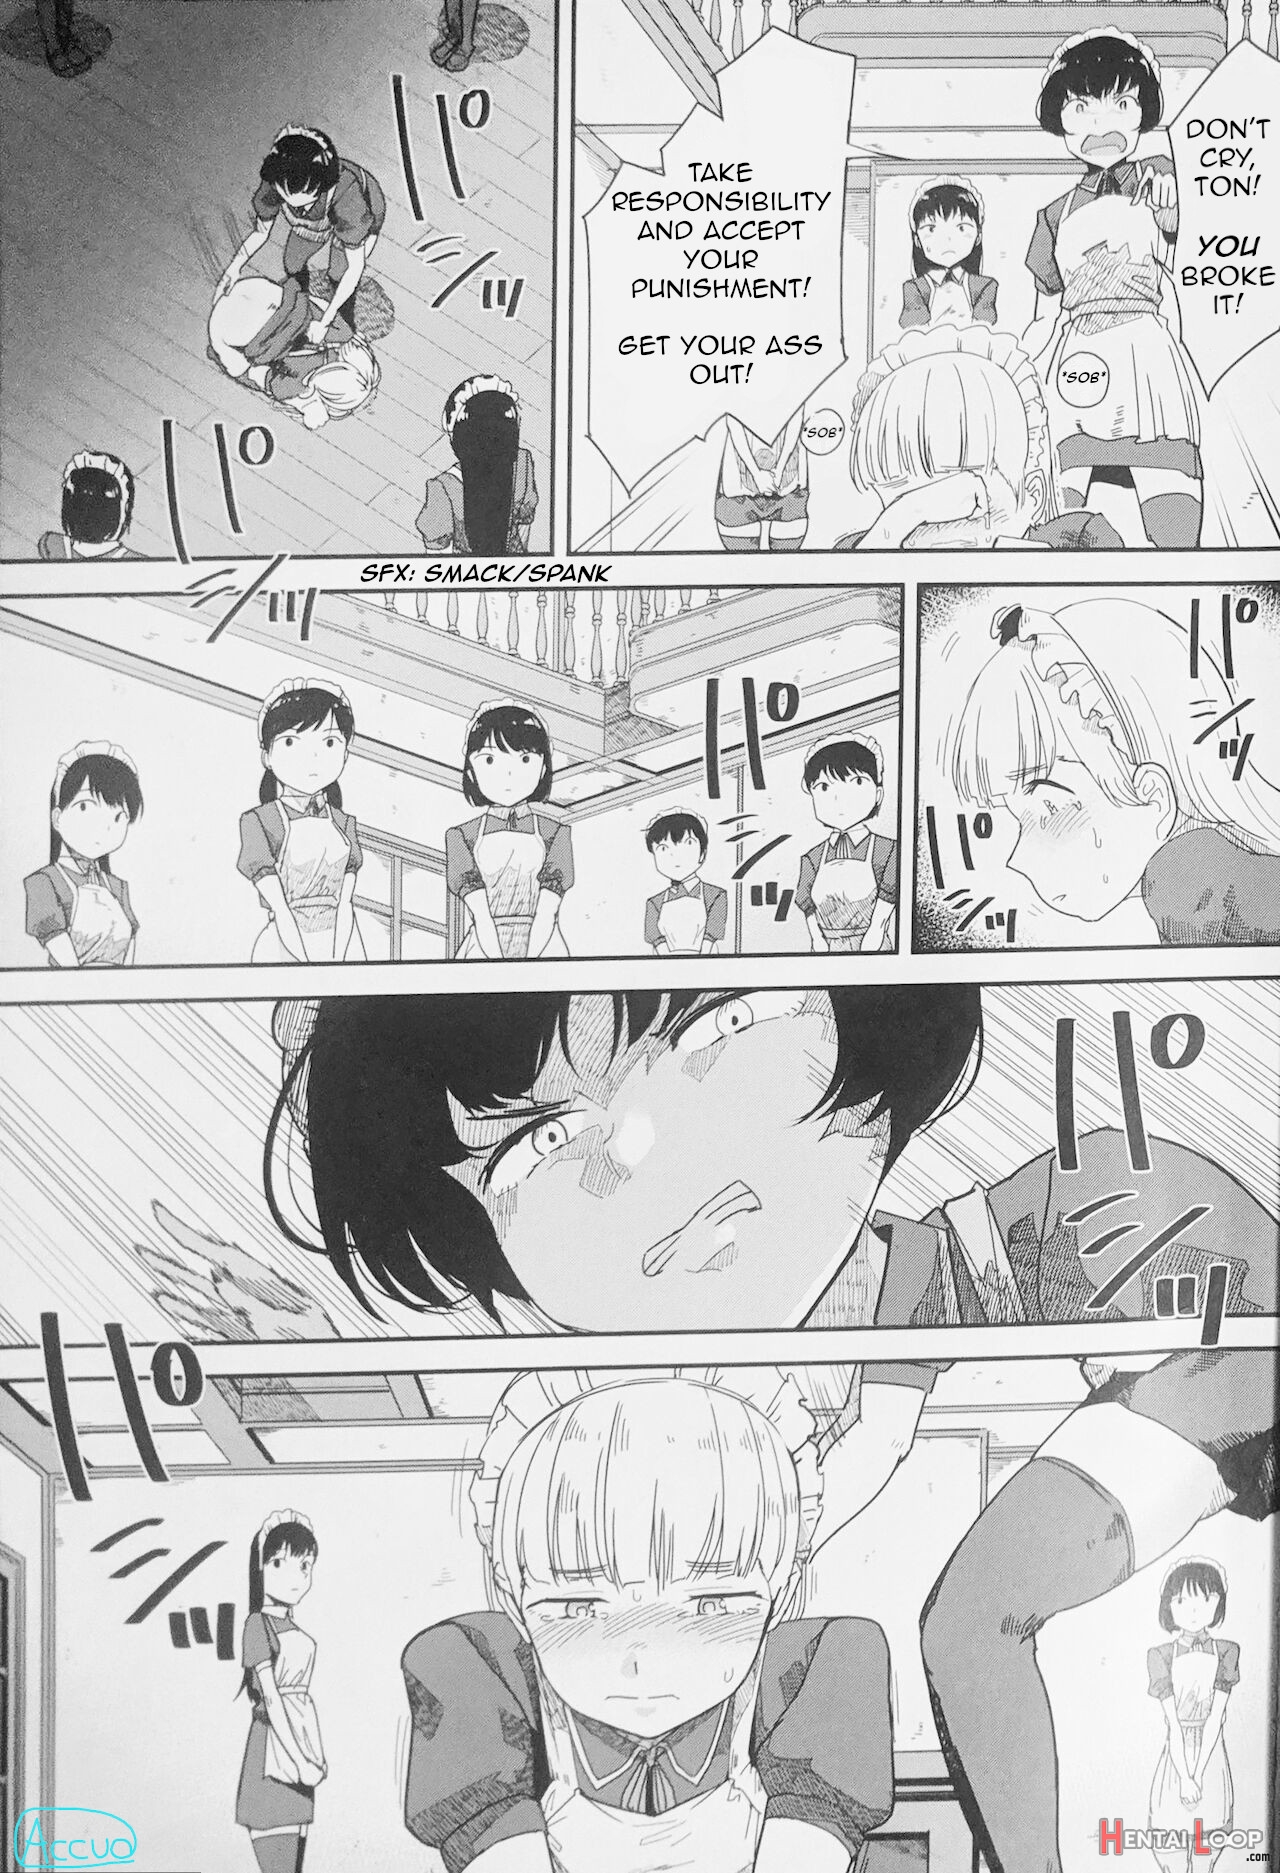 Eating Maid 2 - Lust For Domination page 6